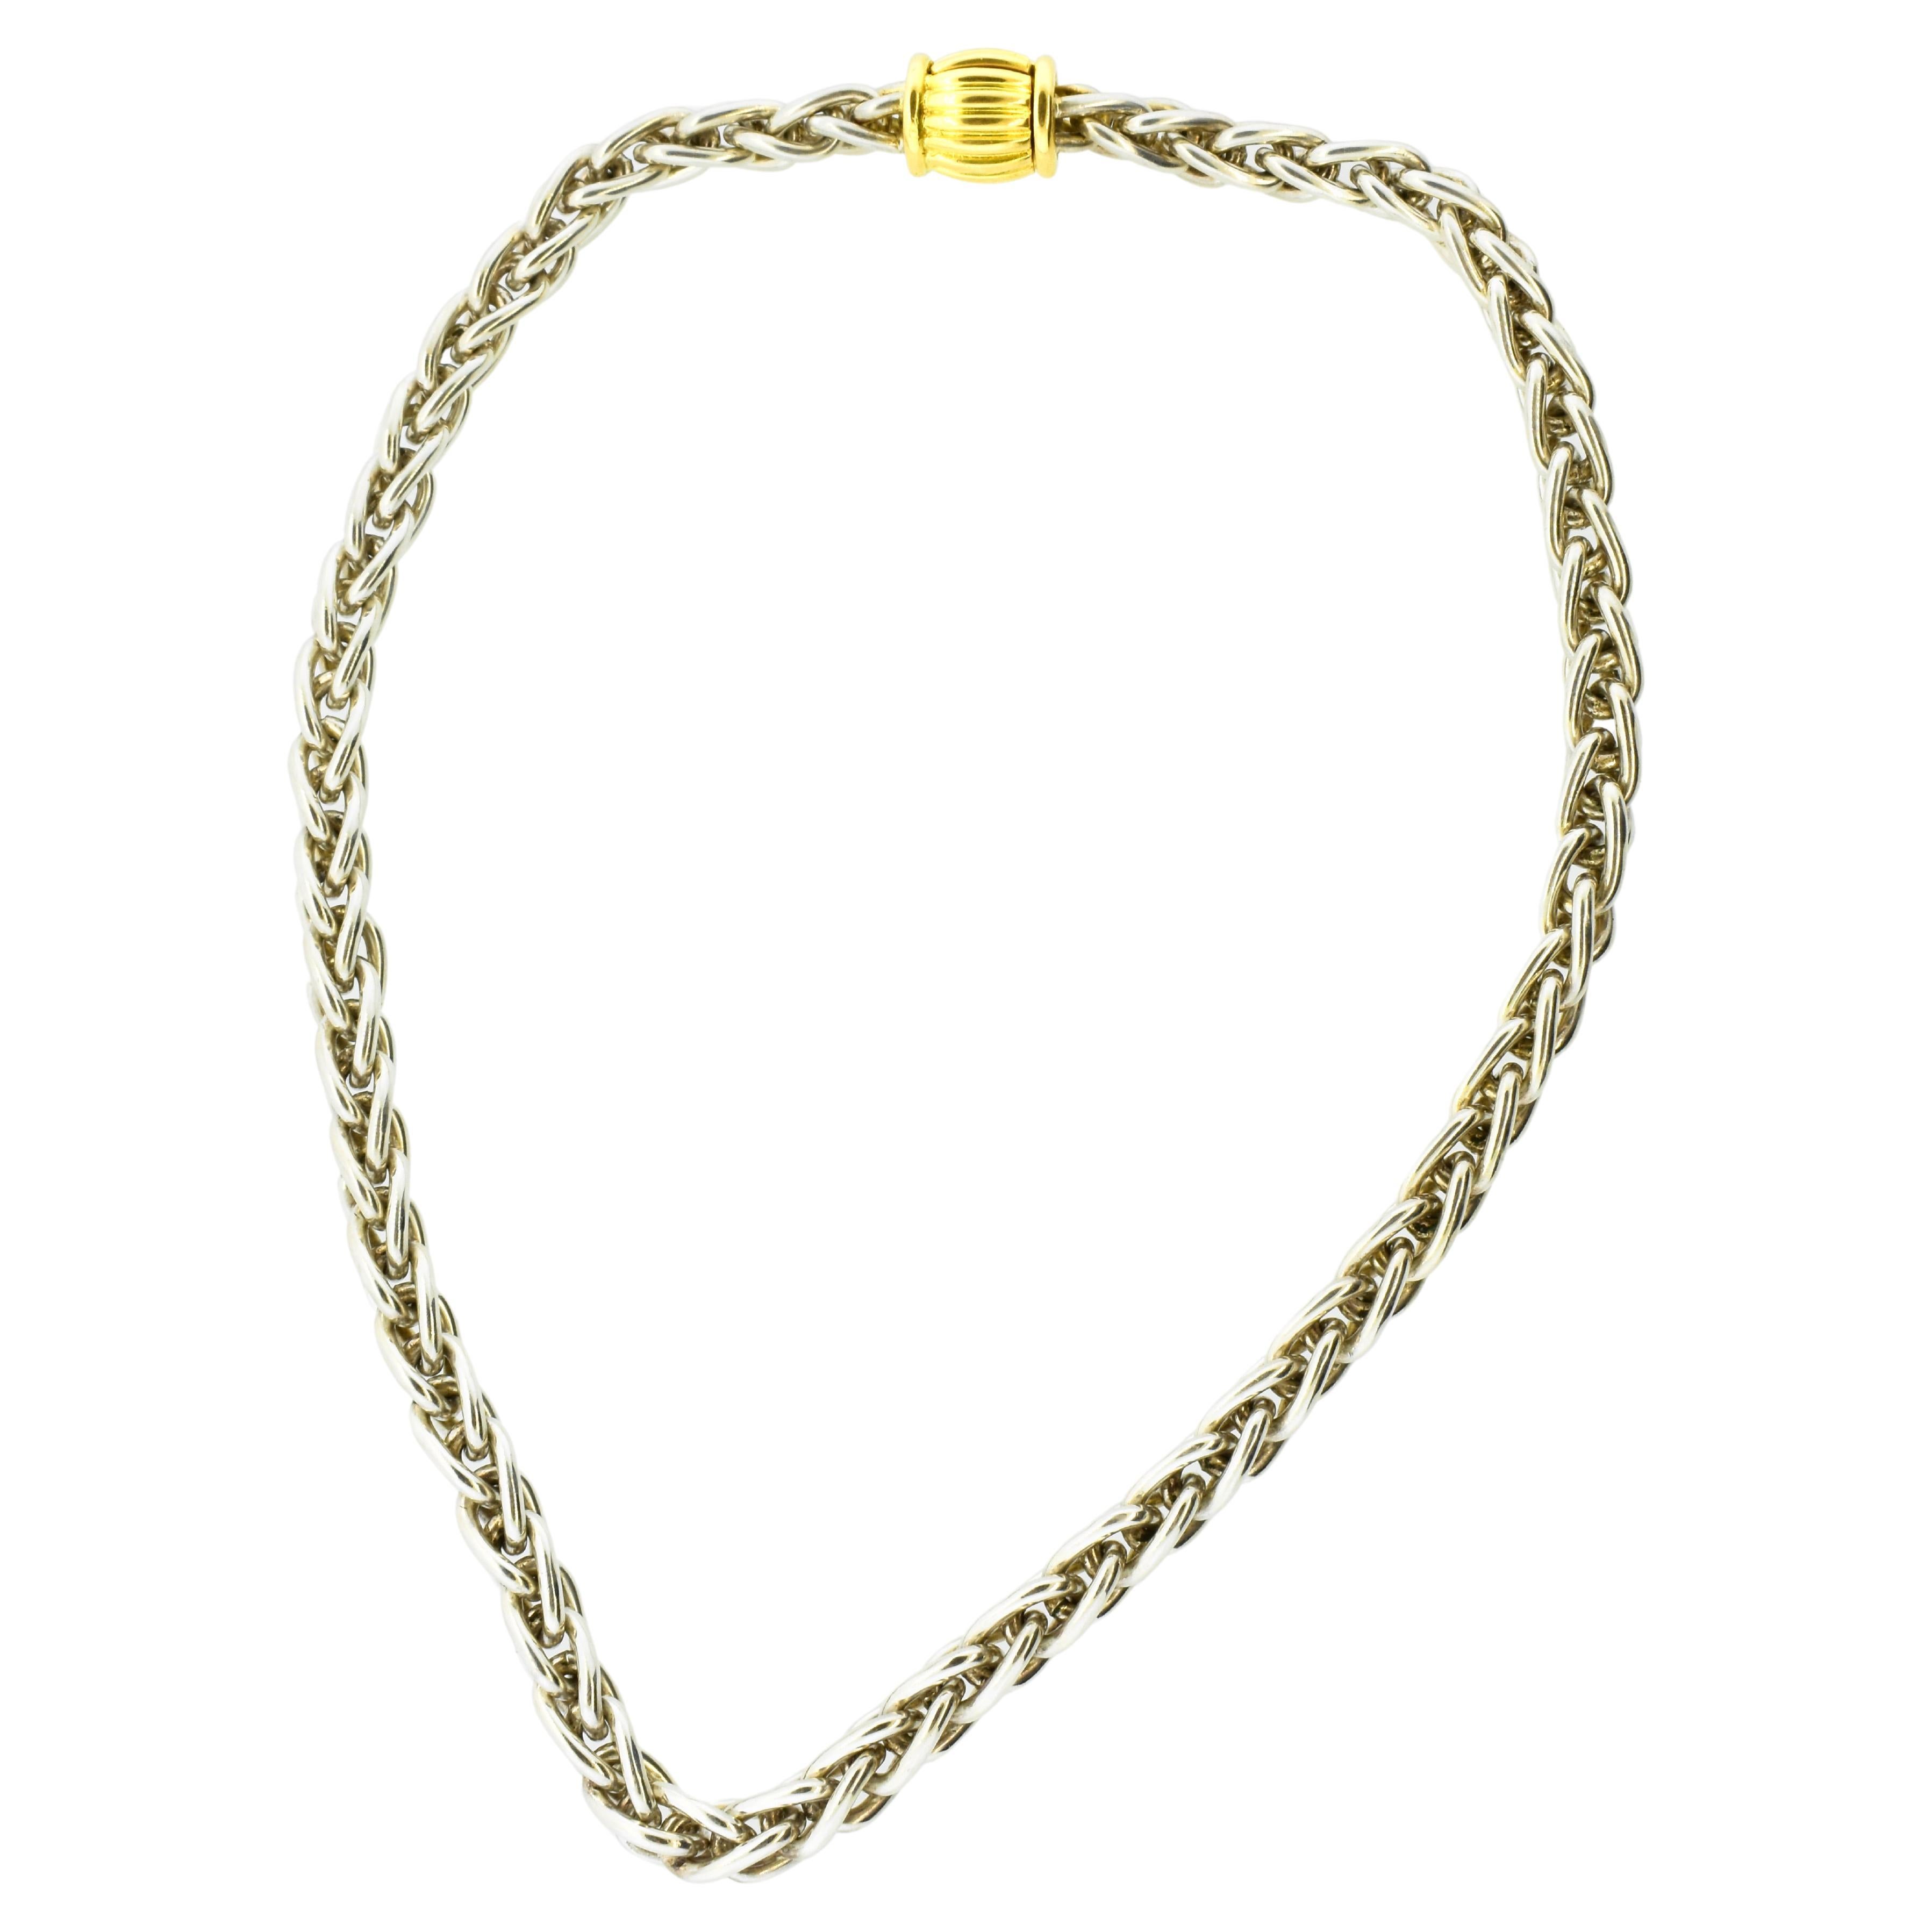 Hermes Paris 18K yellow gold and sterling silver vintage necklace.  This particular necklace is rarely found today.  The 18K stylized barrel clasp is large and robust, the sterling silver, 925, chain is a complex link, the weight is 89.3 grams, and